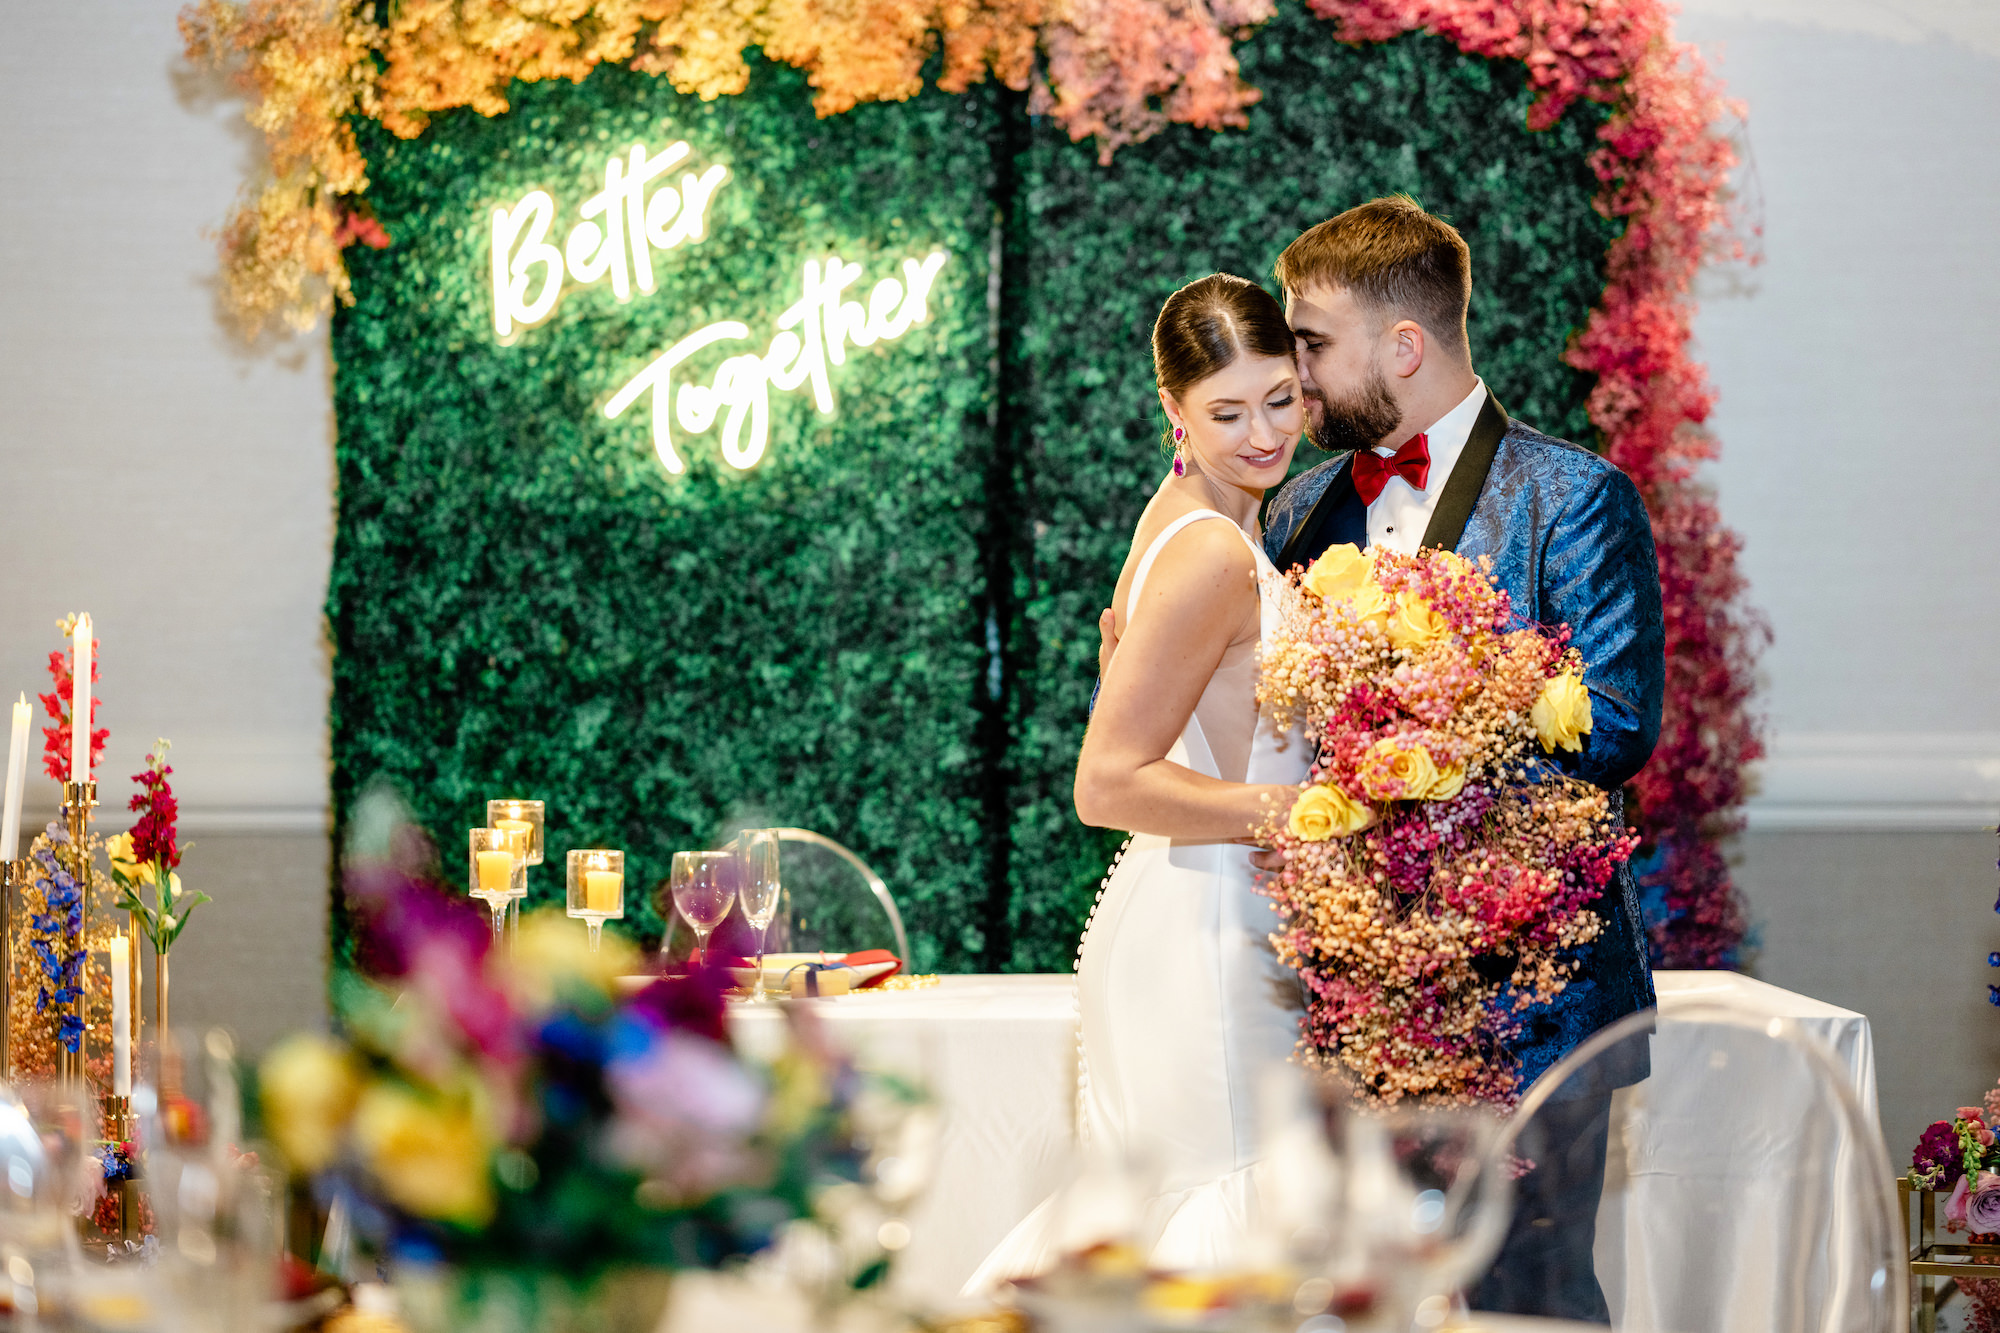 Better Together Neon Sign Greenery Backdrop | Whimsical Colorful Wedding Inspiration | Tampa Bay Planner Eventfull Weddings